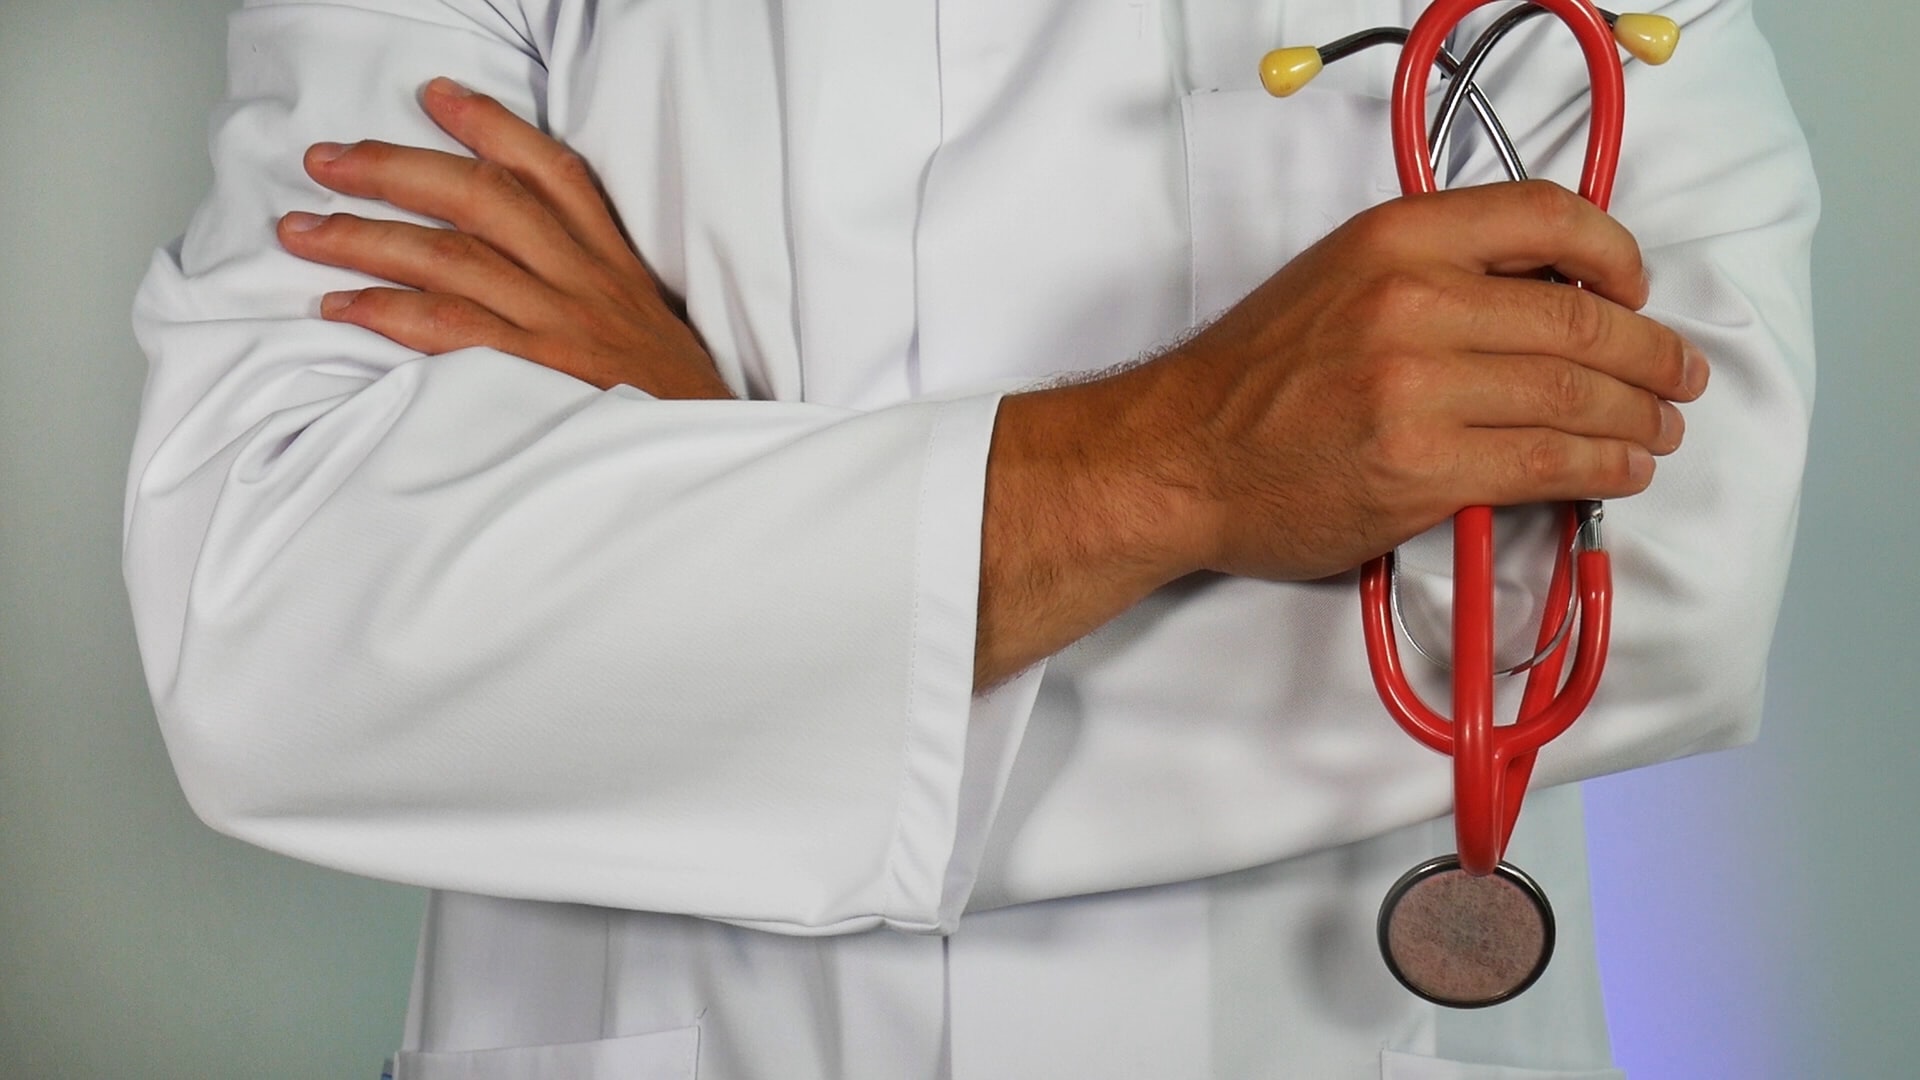 A doctor in a white coat holding a red stethoscope